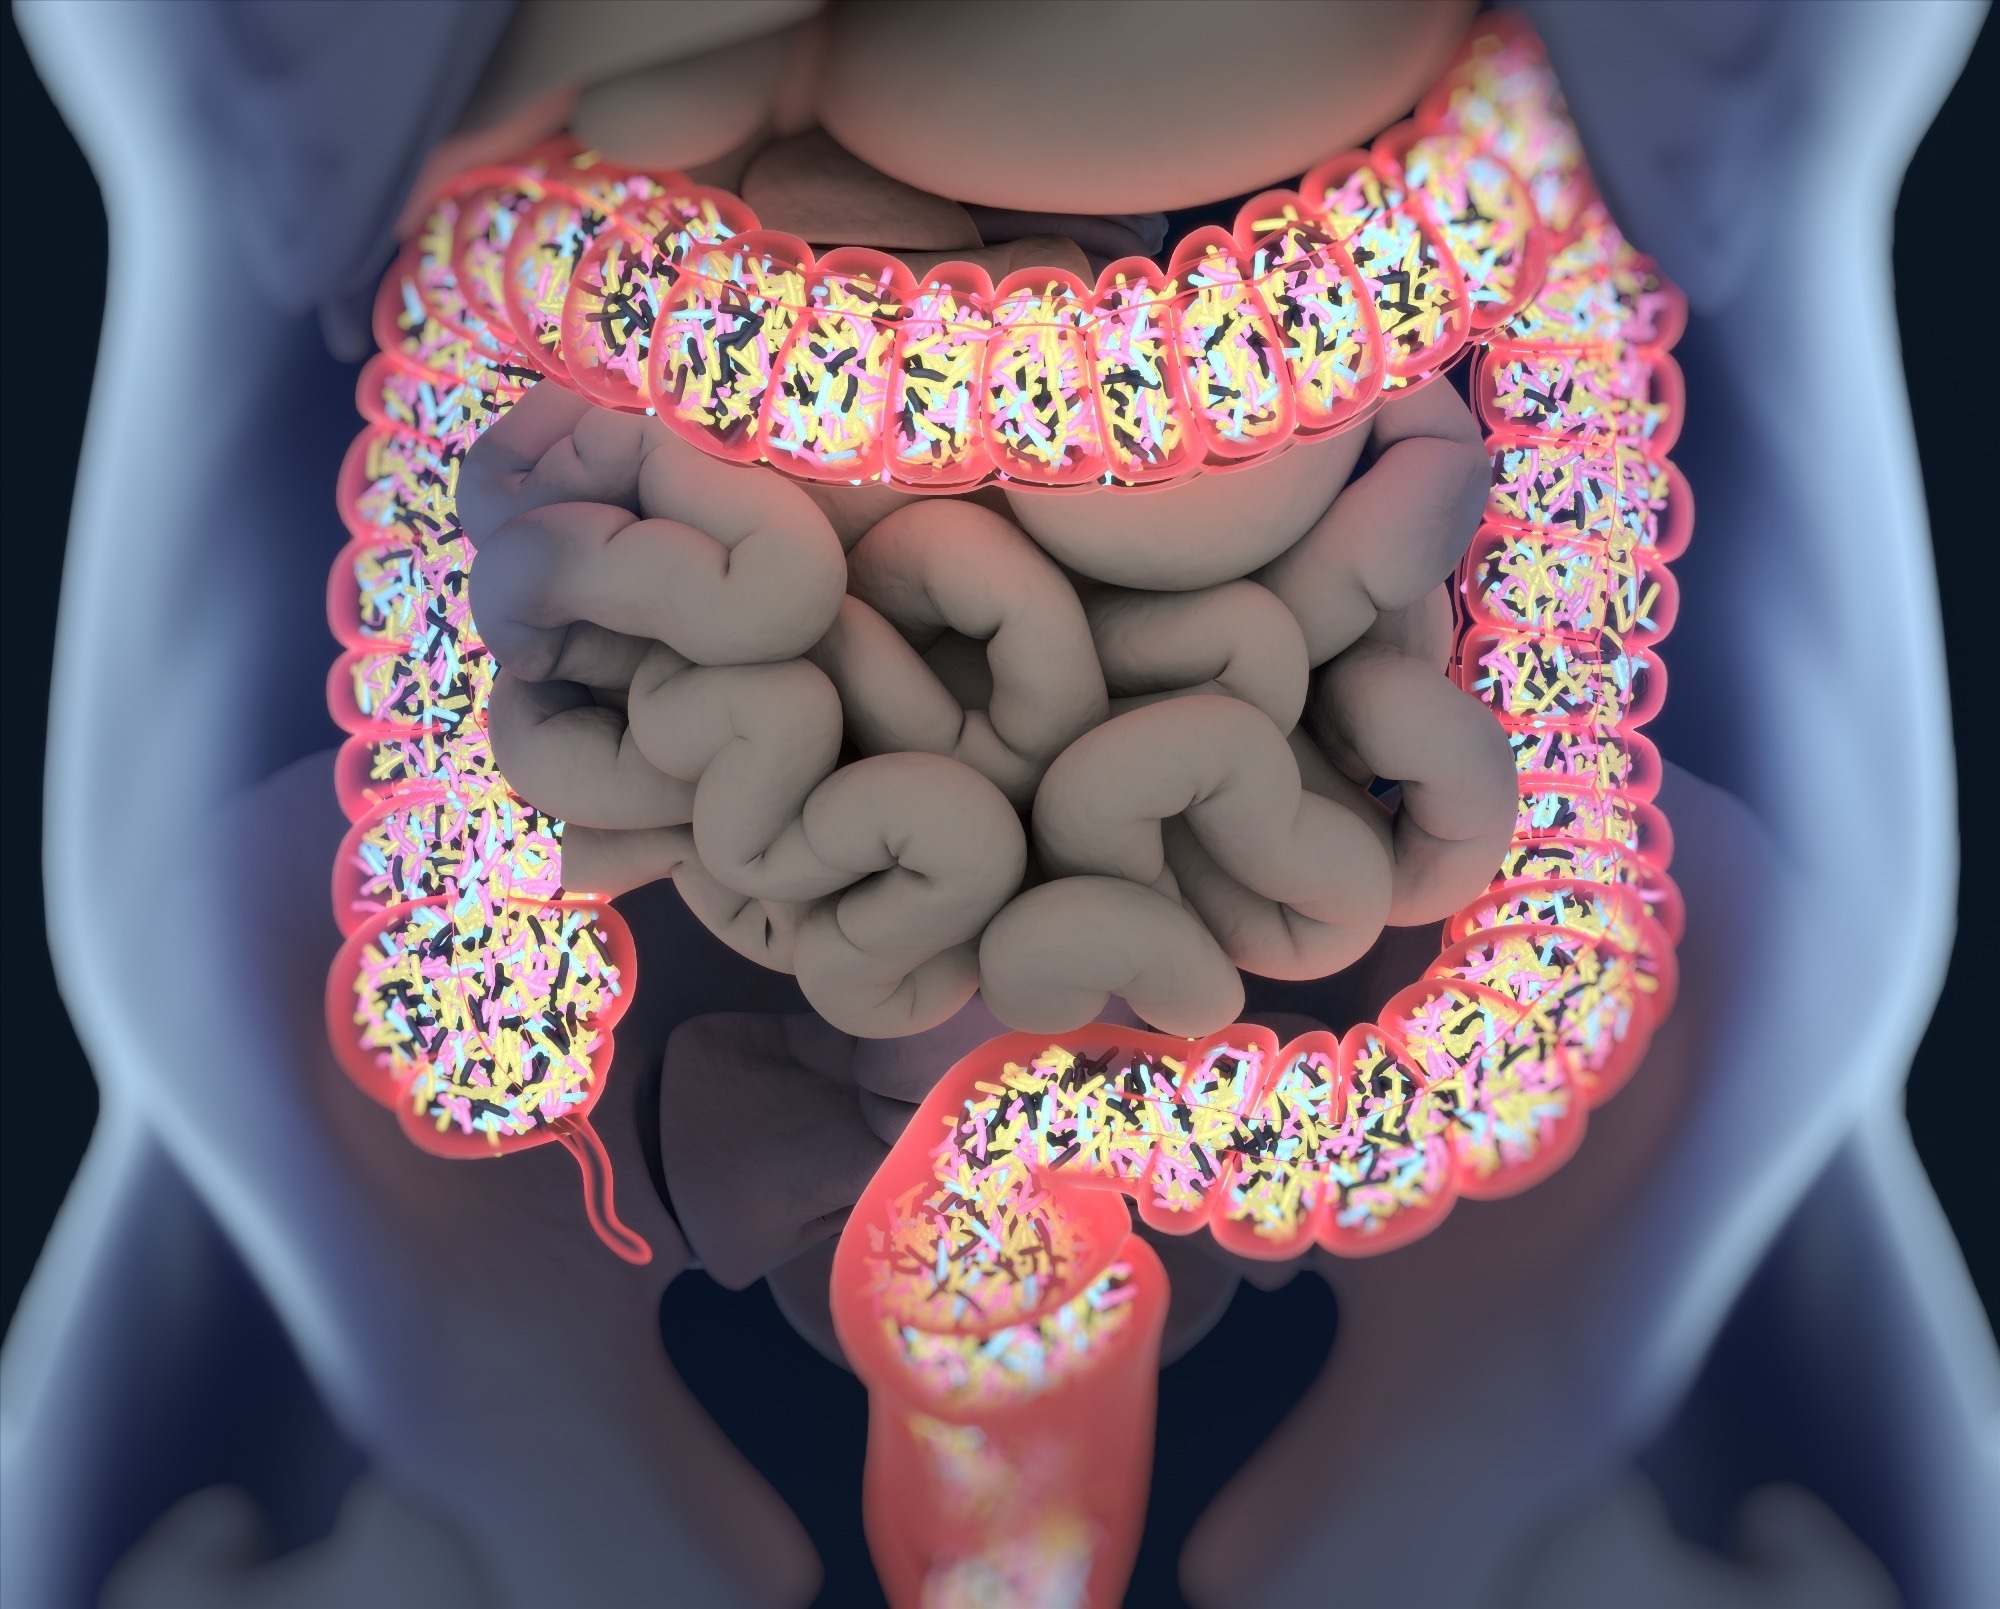 Study: The Effect of a Planetary Health Diet on the Human Gut Microbiome: A Descriptive Analysis. Image Credit: AnatomyImage/Shutterstock.com